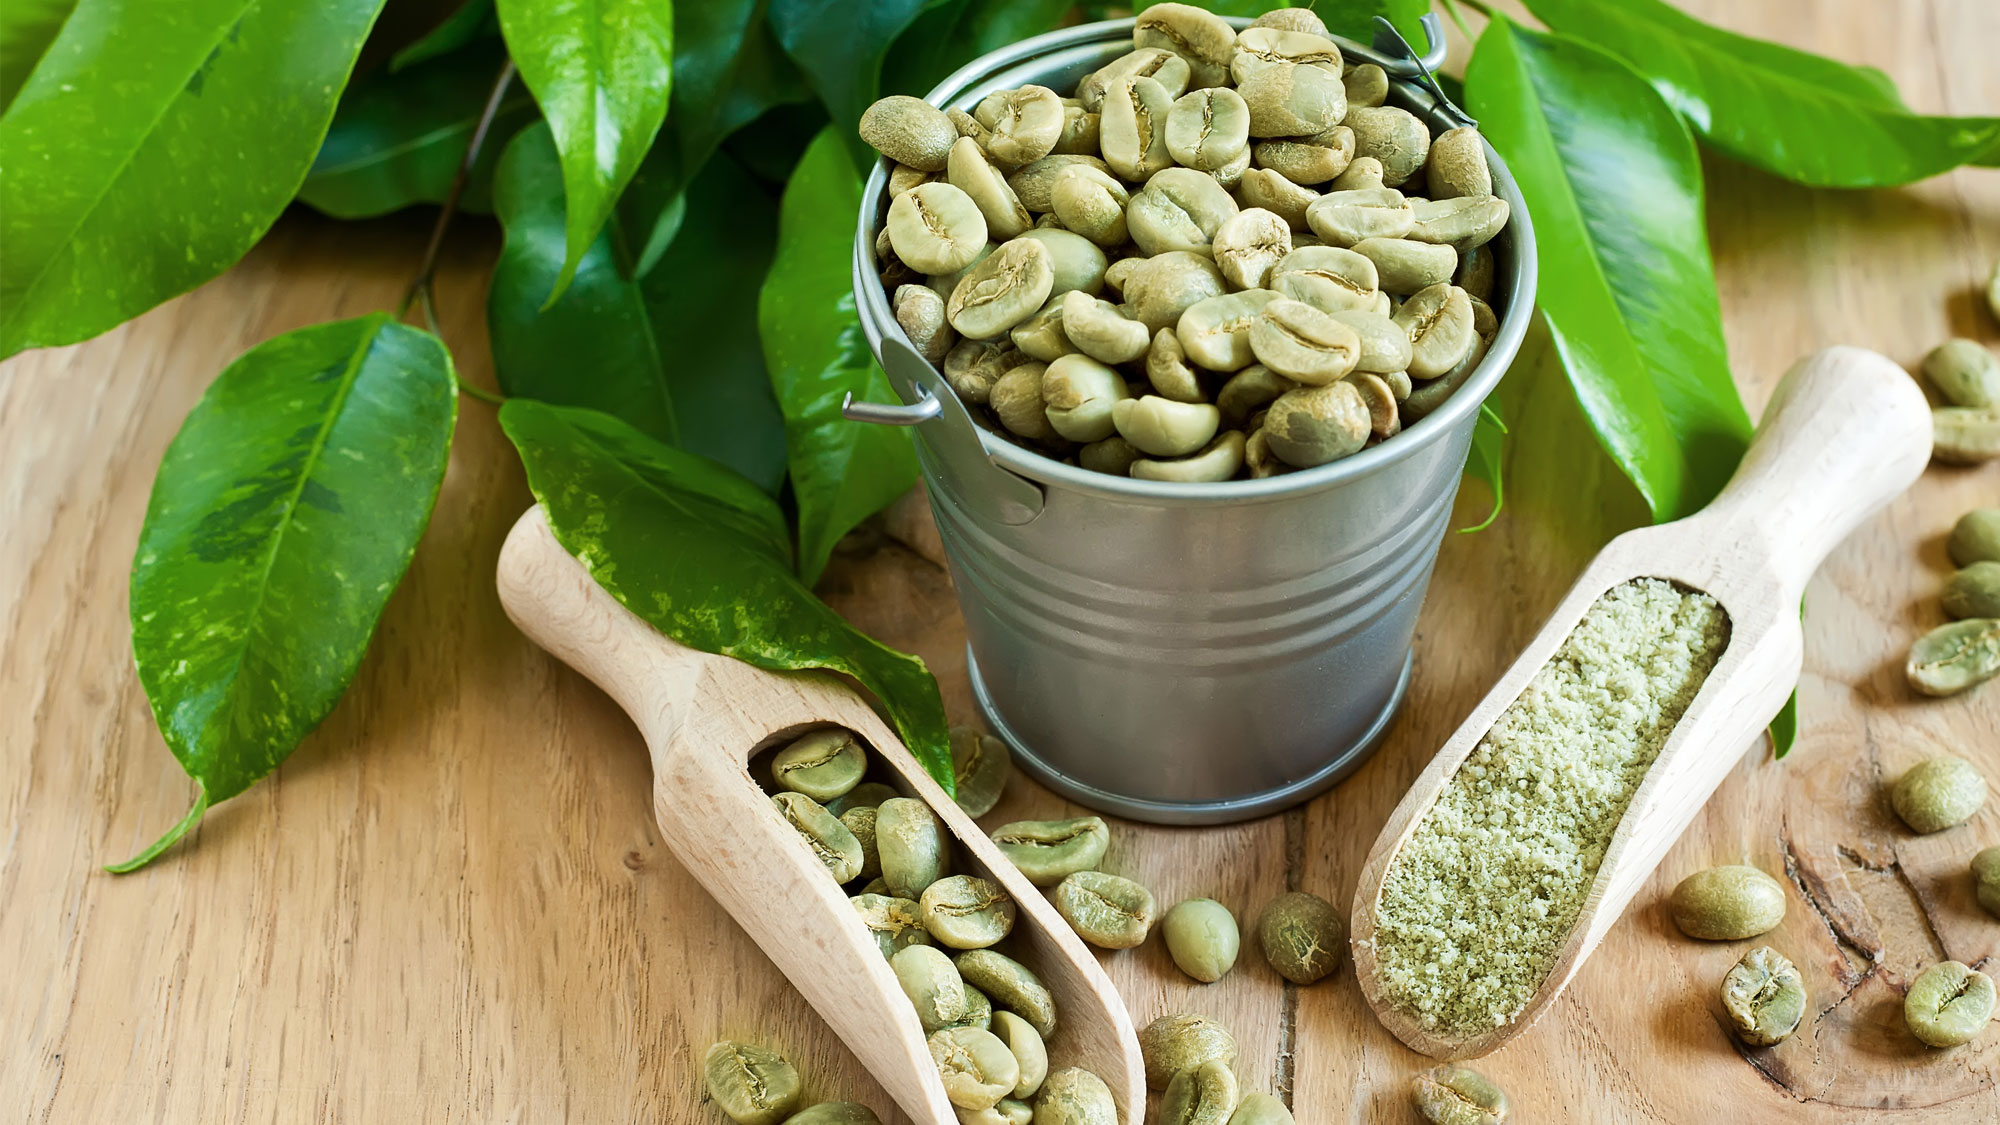 Why Everyone is Falling in Love with Green Coffee - FYI